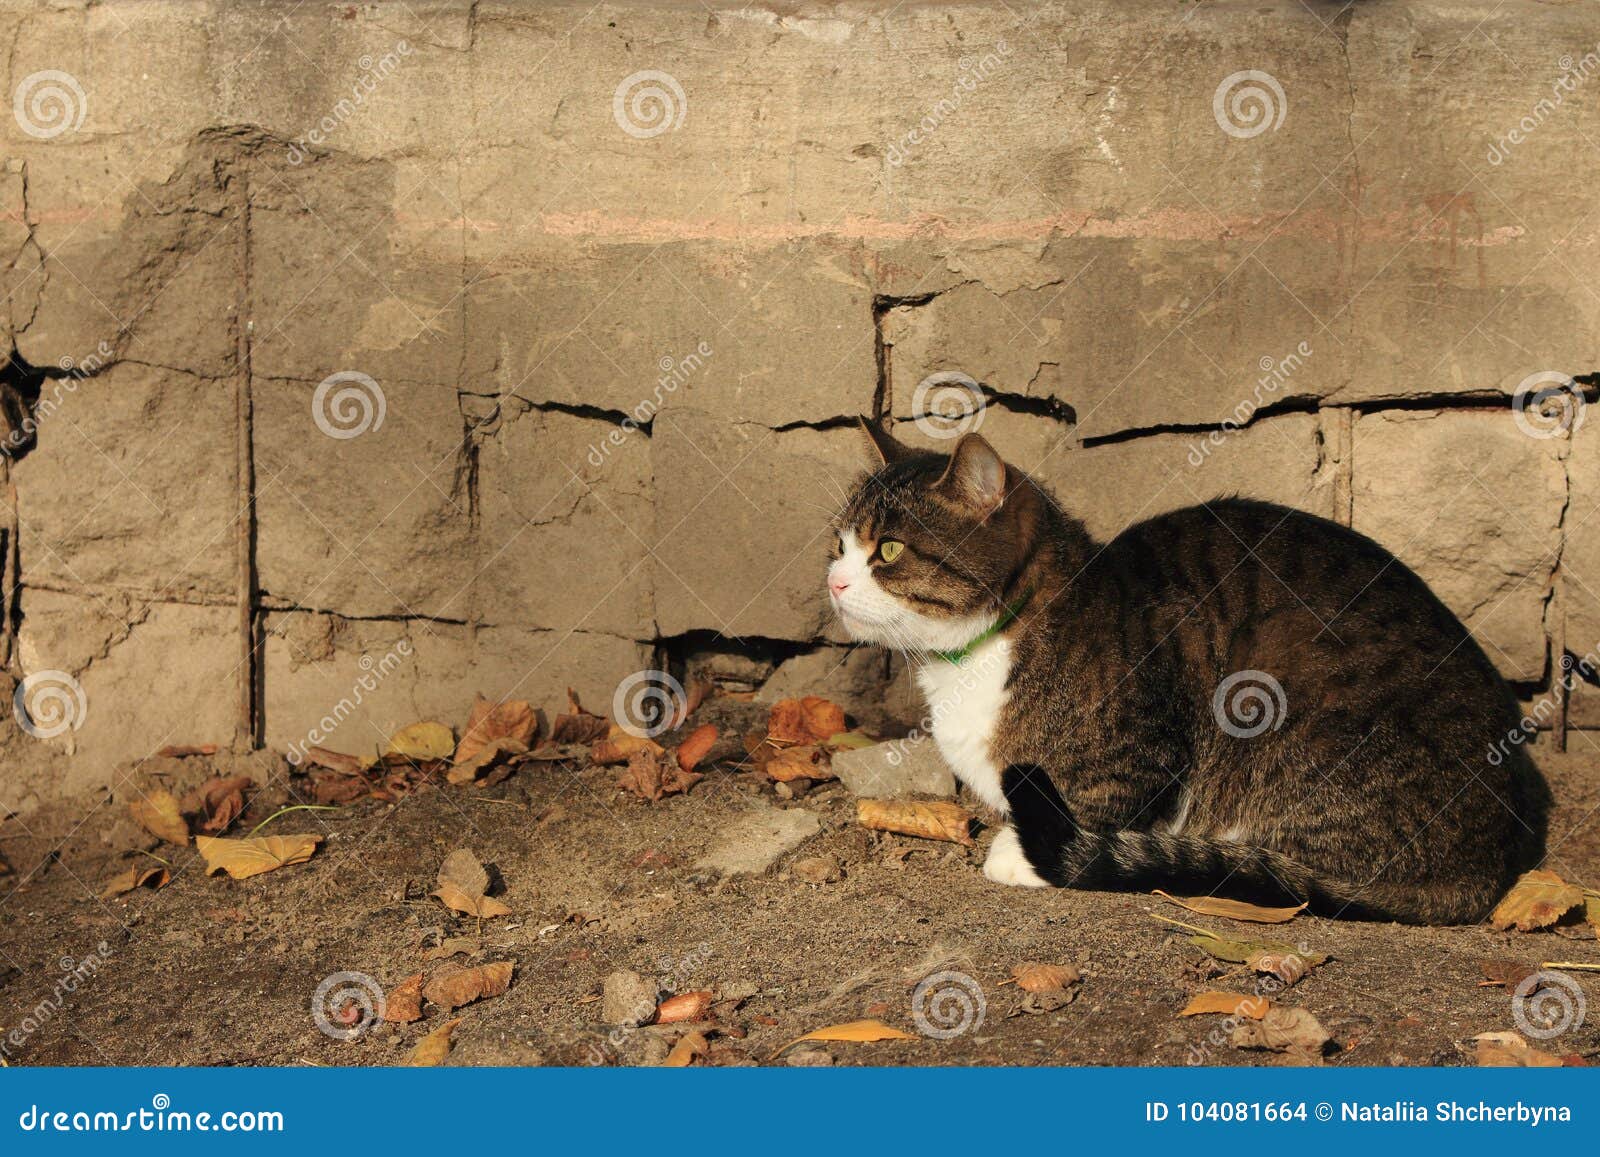  Cat  Waiting  For Its Owner  Against Concrete Grey Wall And 